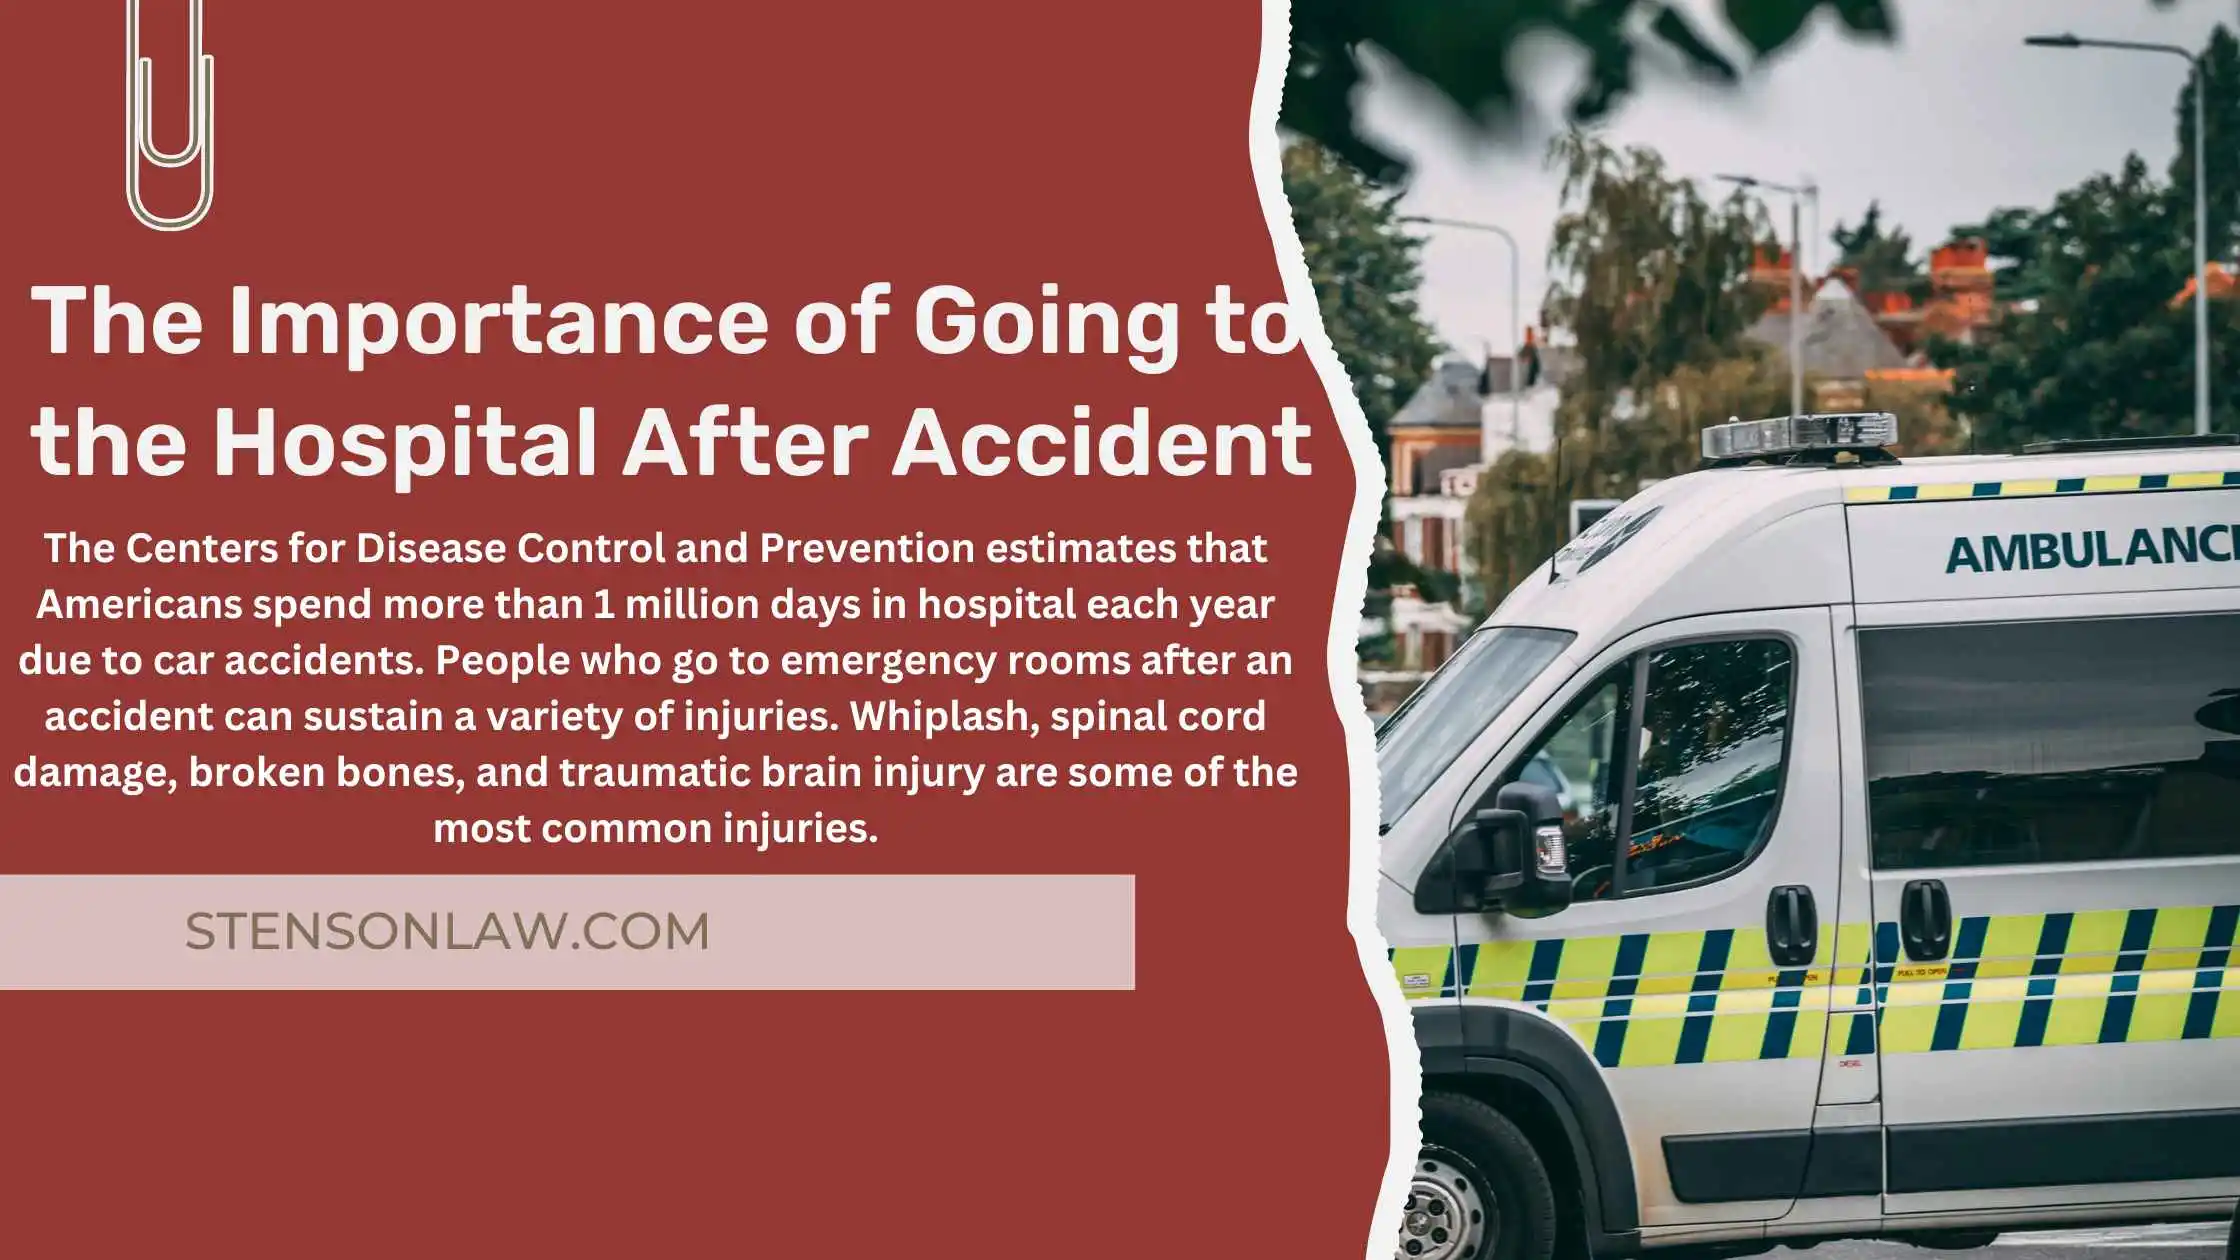 The Importance of Going to the Hospital After a Car Accident
